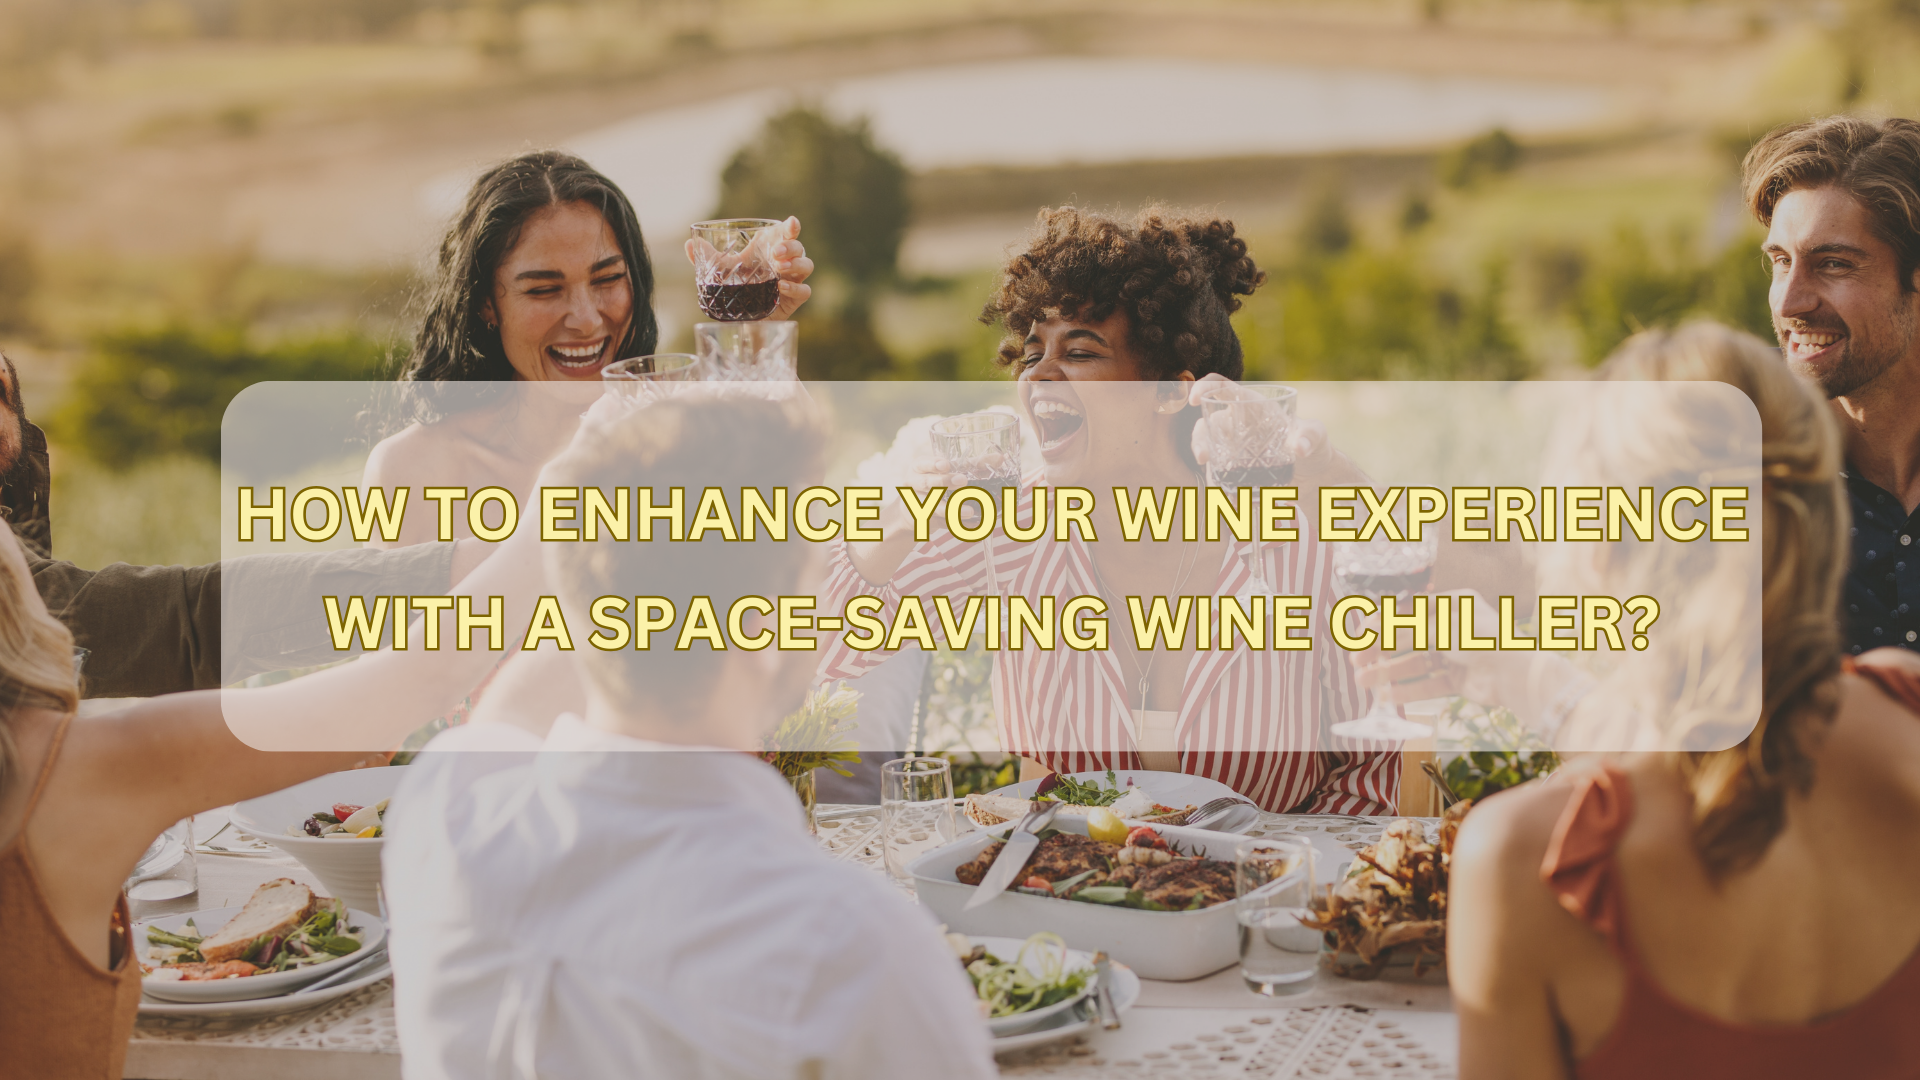 How to Enhance Your Wine Experience with a Space-Saving Wine Chiller